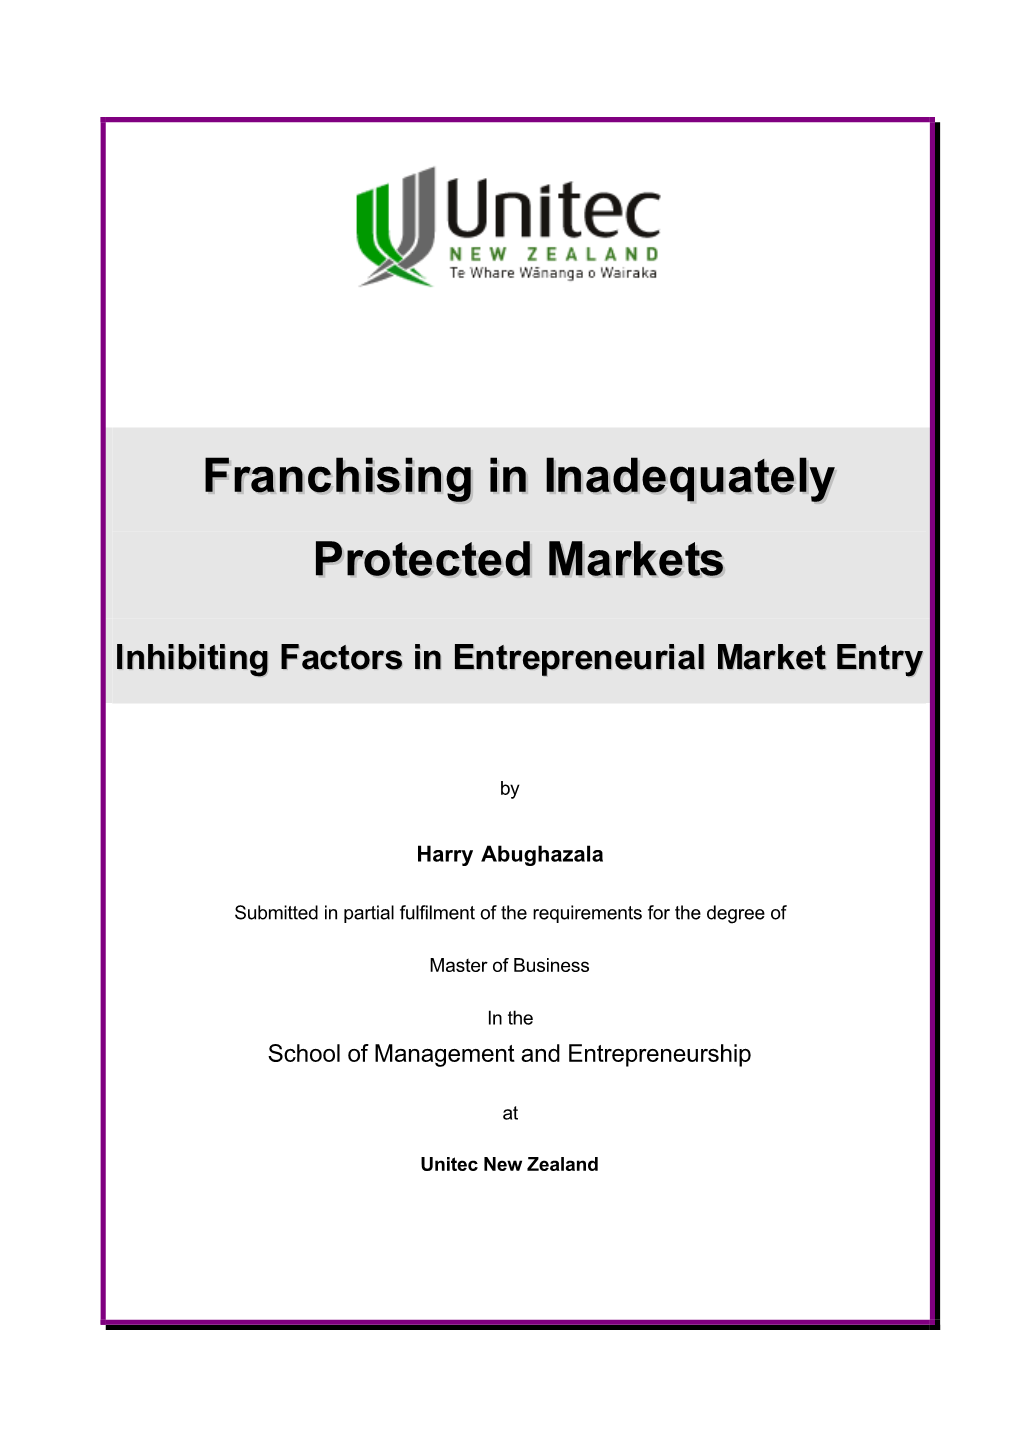 Franchising in Inadequately Protected Markets: Inhibiting Factors in Entrepreneurial Market Entry